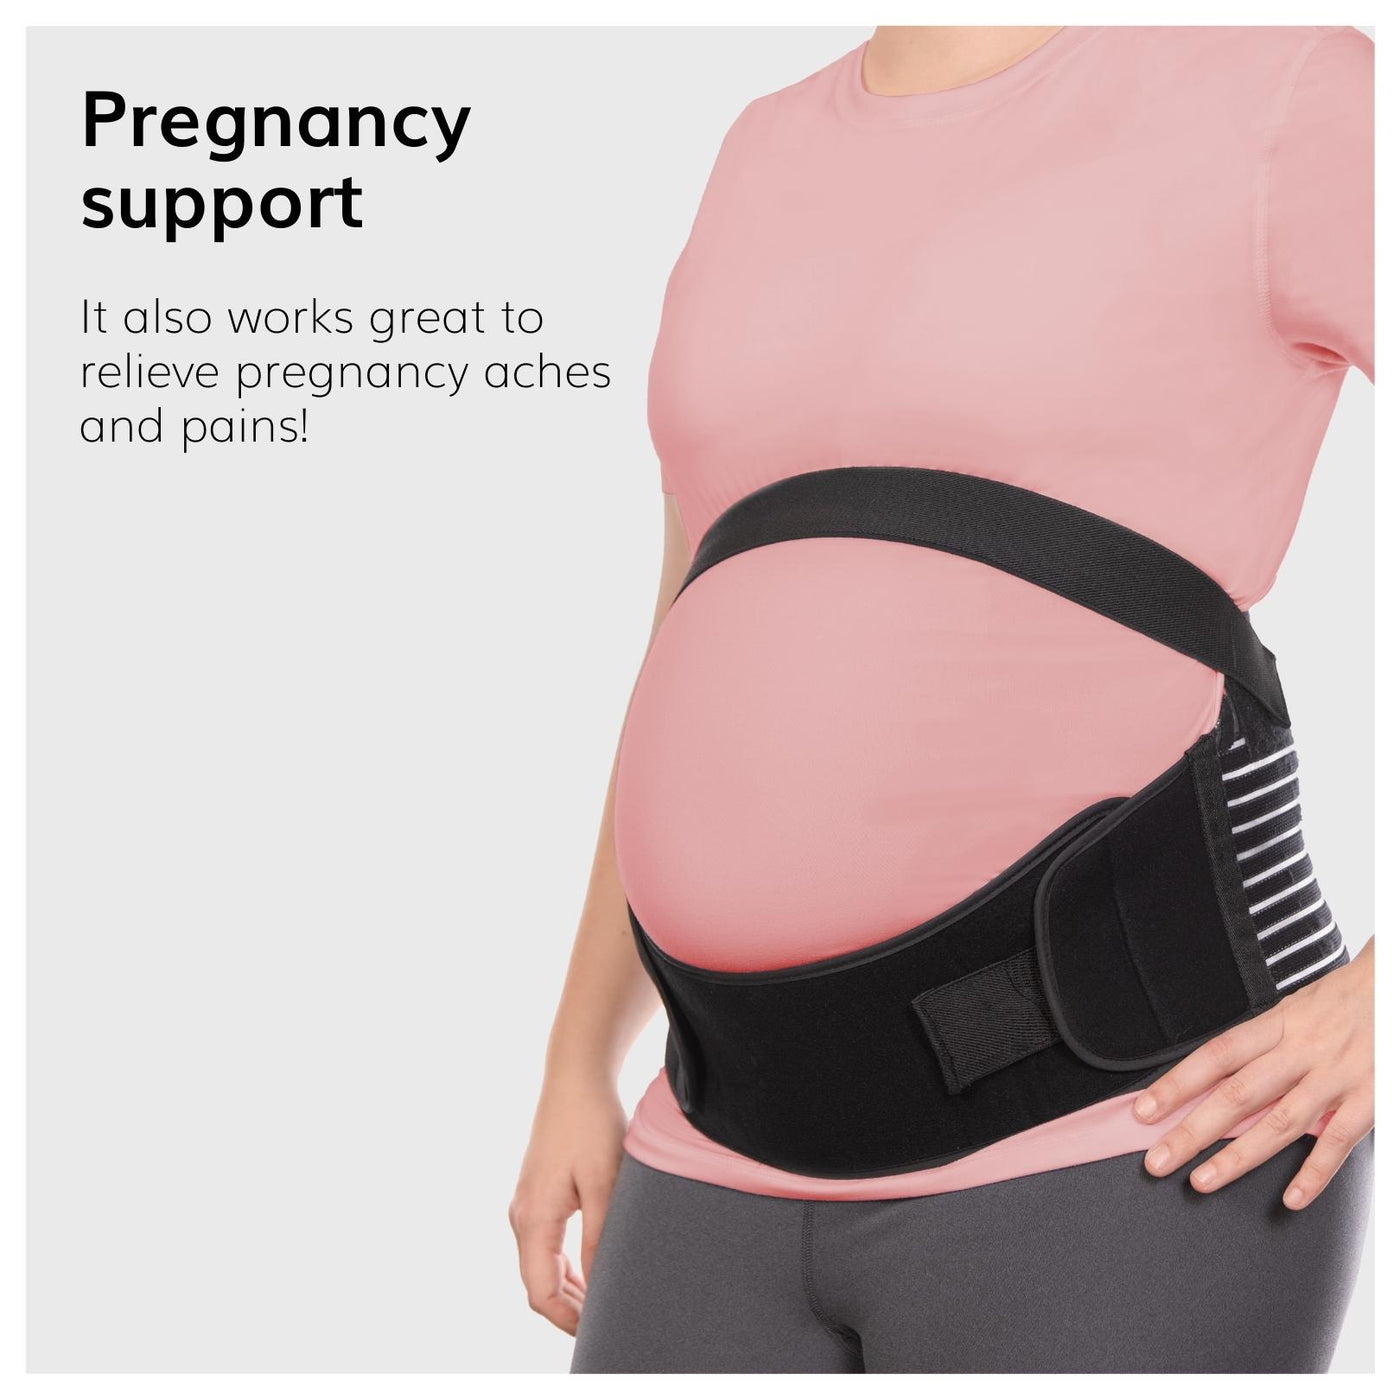 Our hanging stomach relief girdle can be used as a pregnancy support to relieve all pregnancy aches and pains